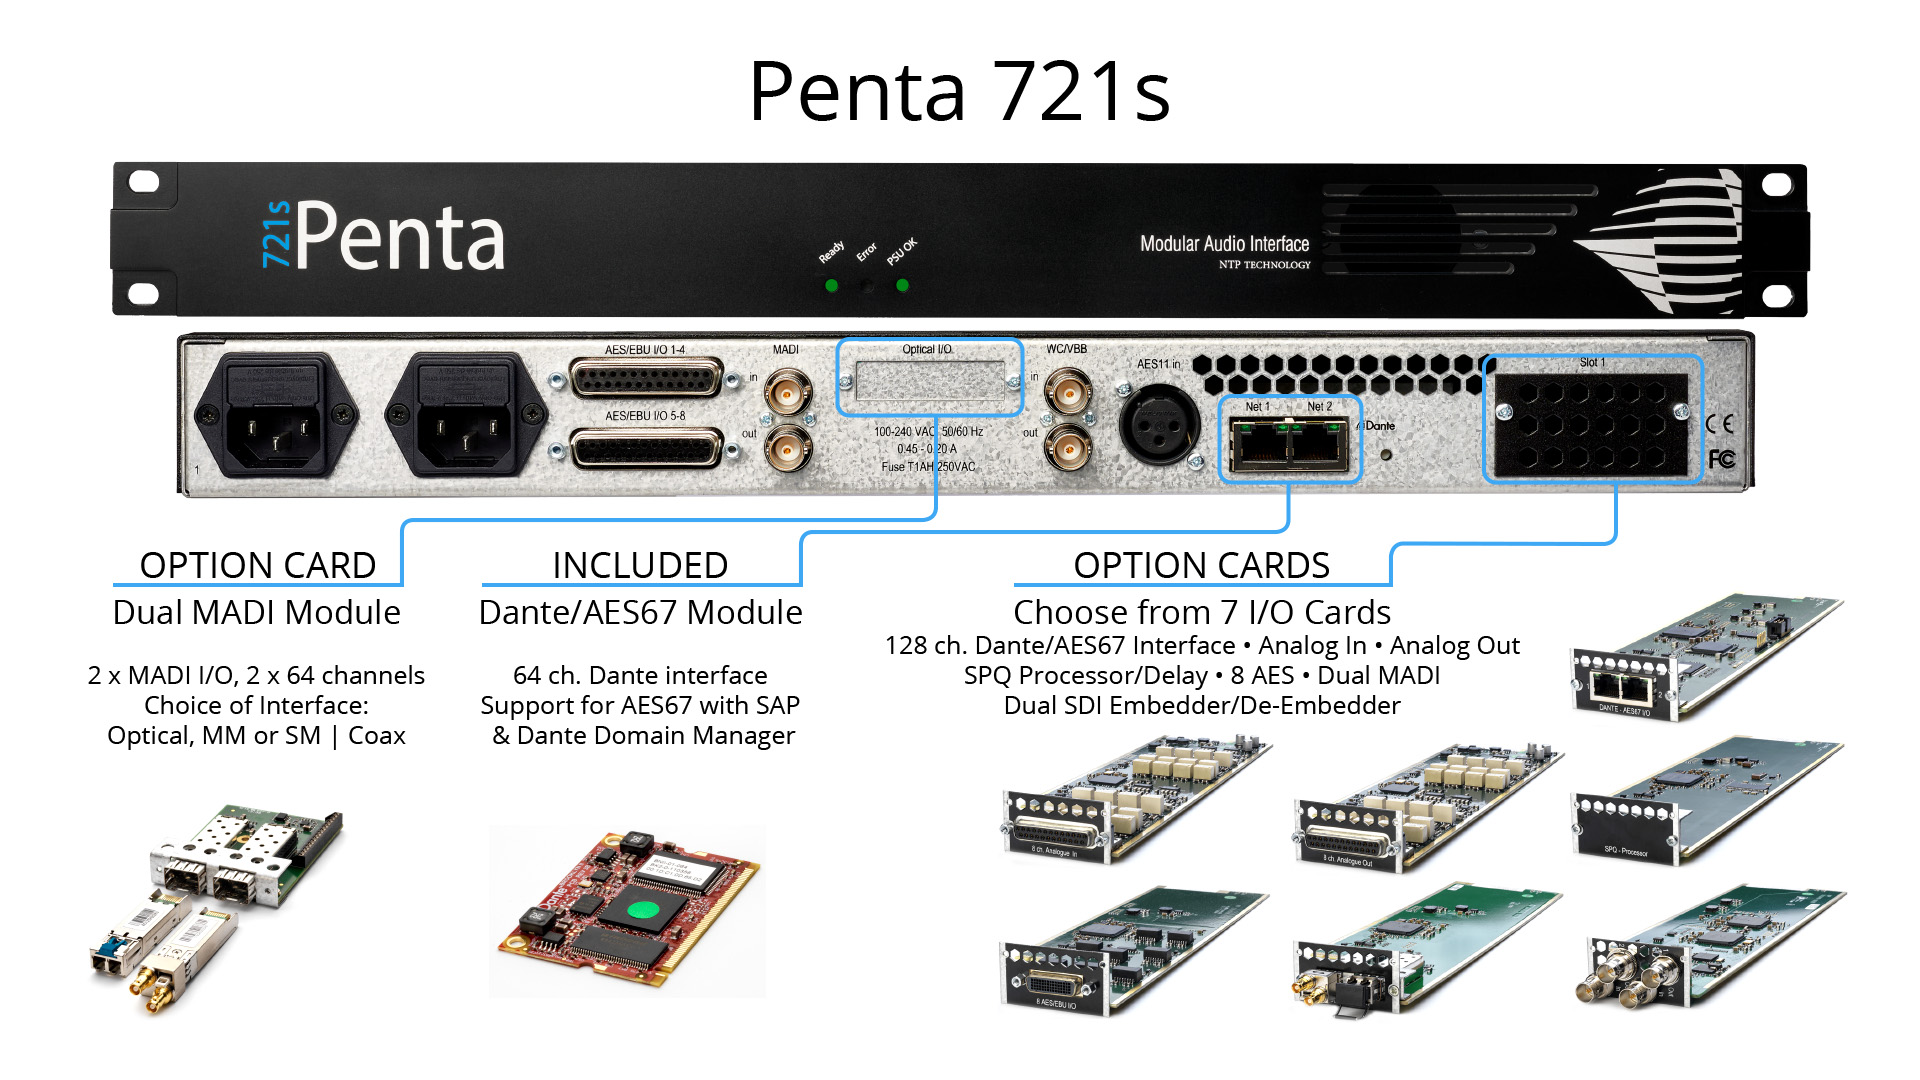 NTP Penta 721s with options